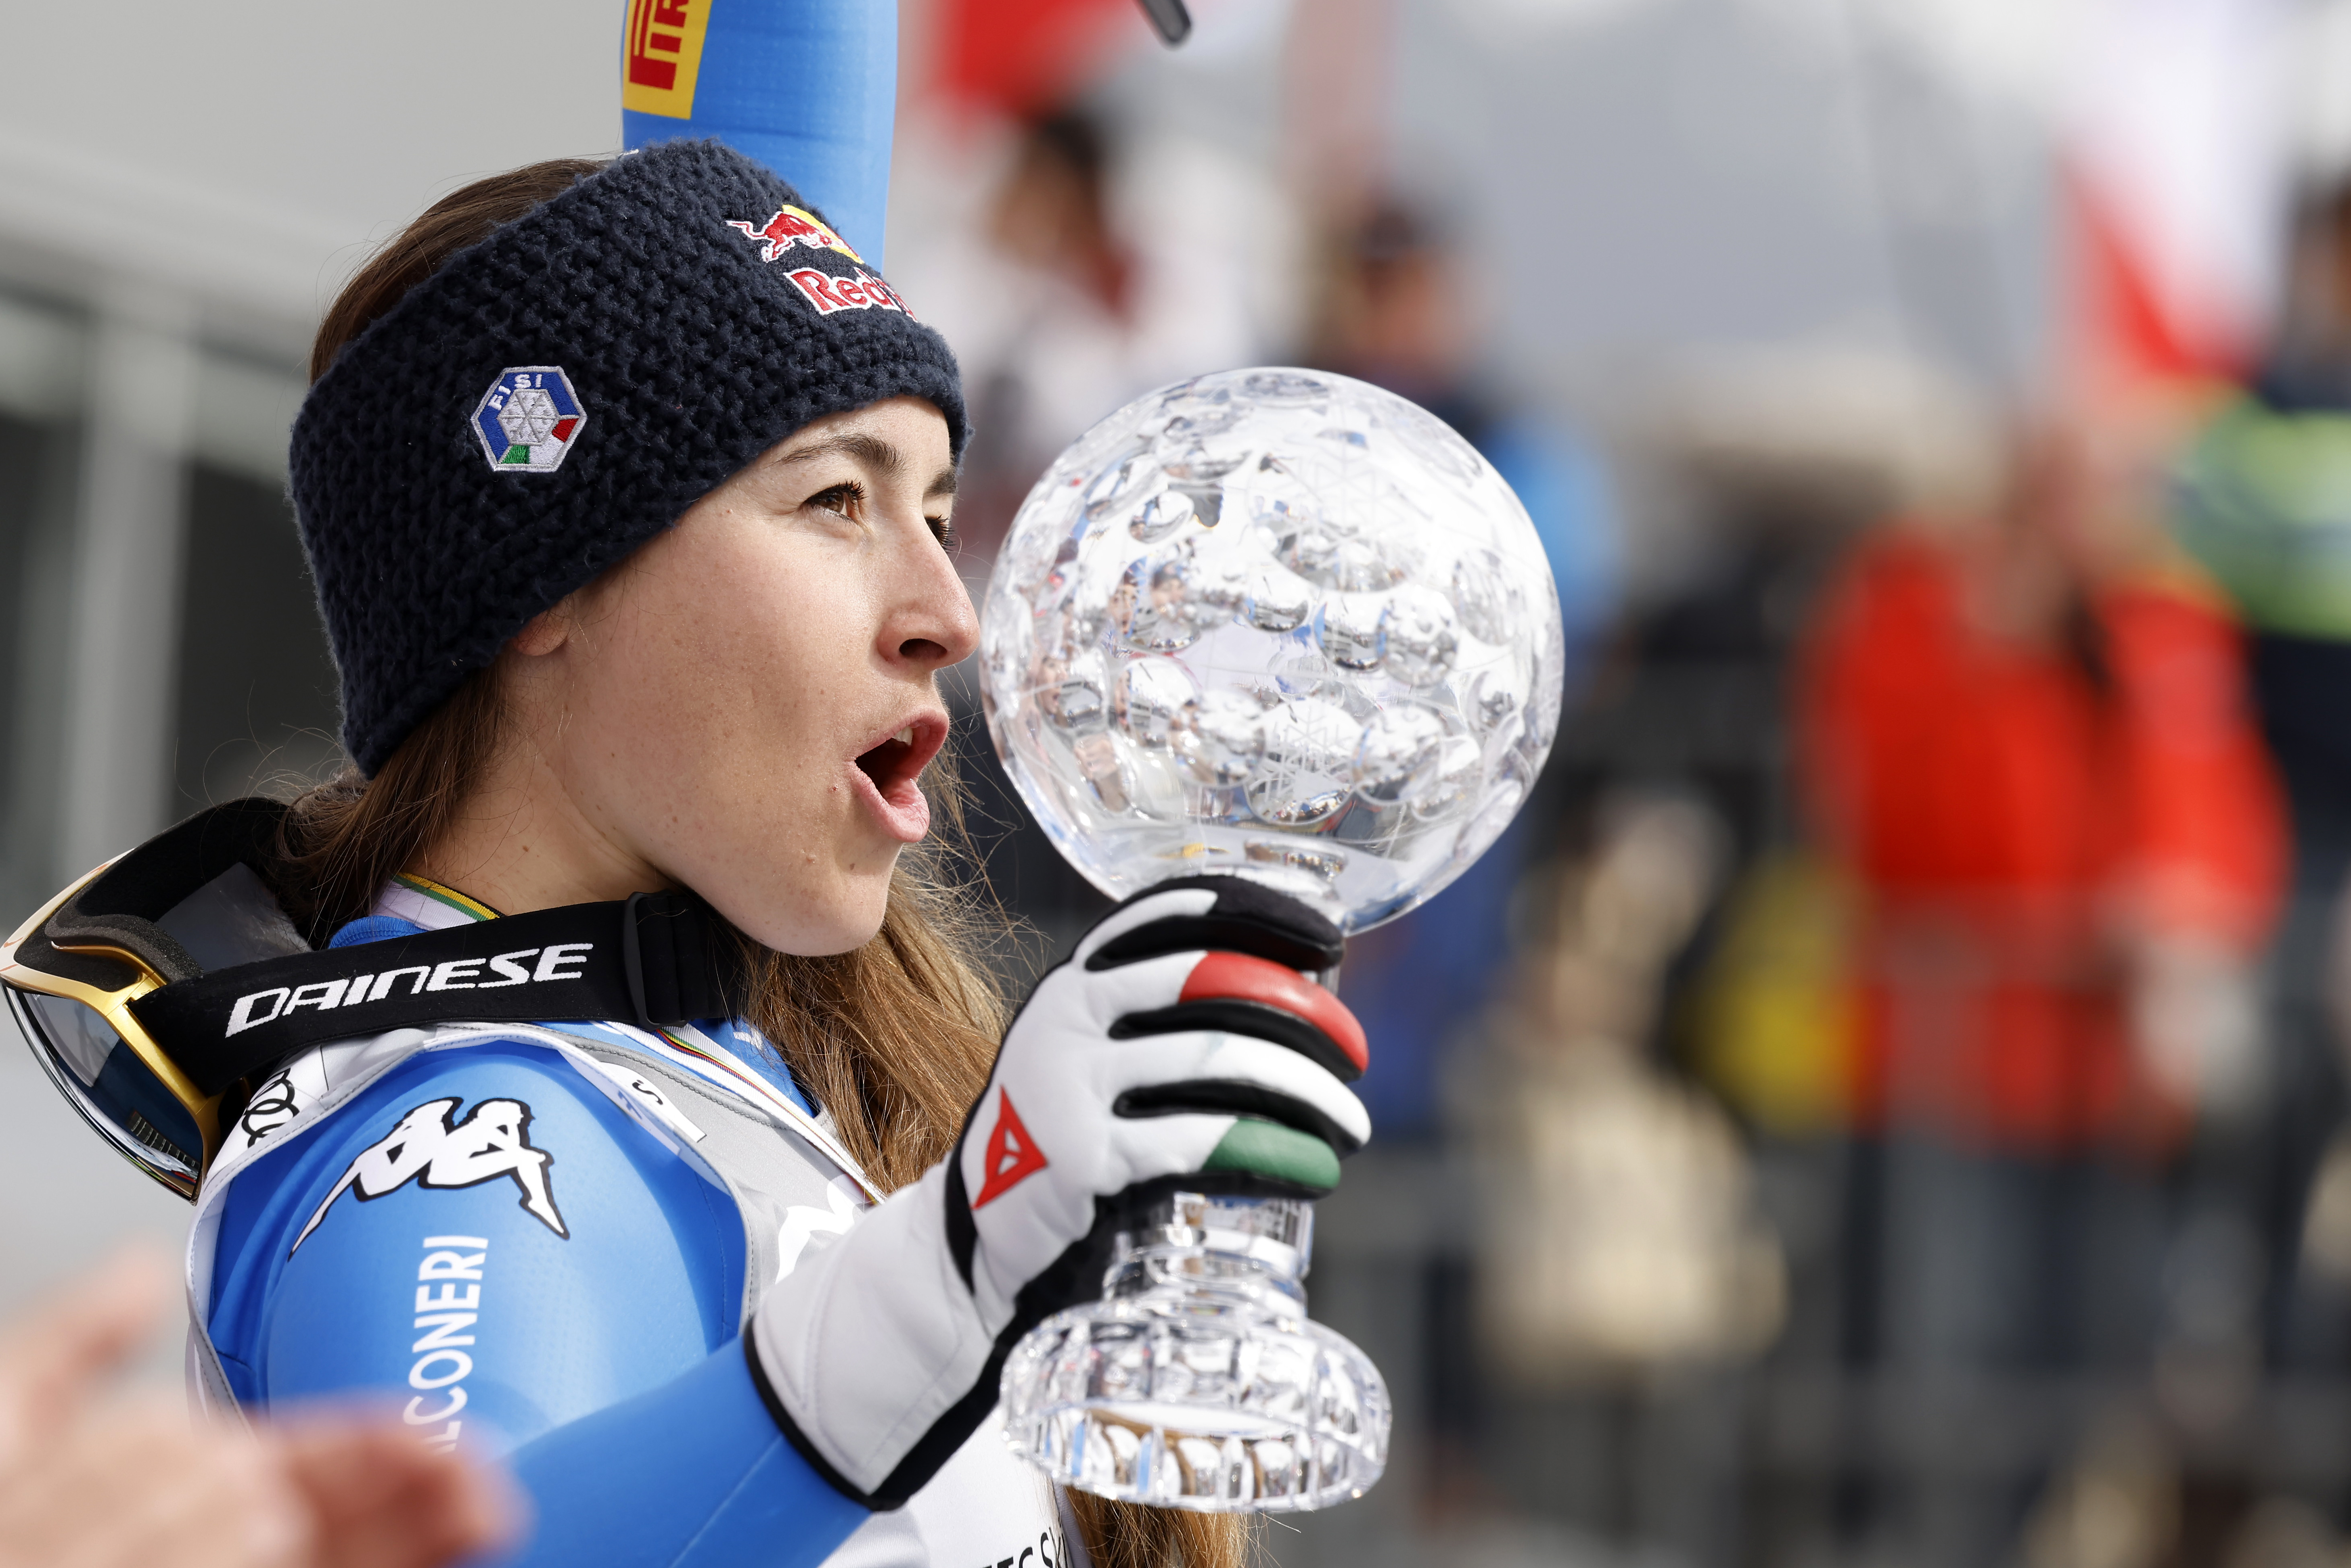 Sofia Goggia of Italy at a downhill event in France in March.